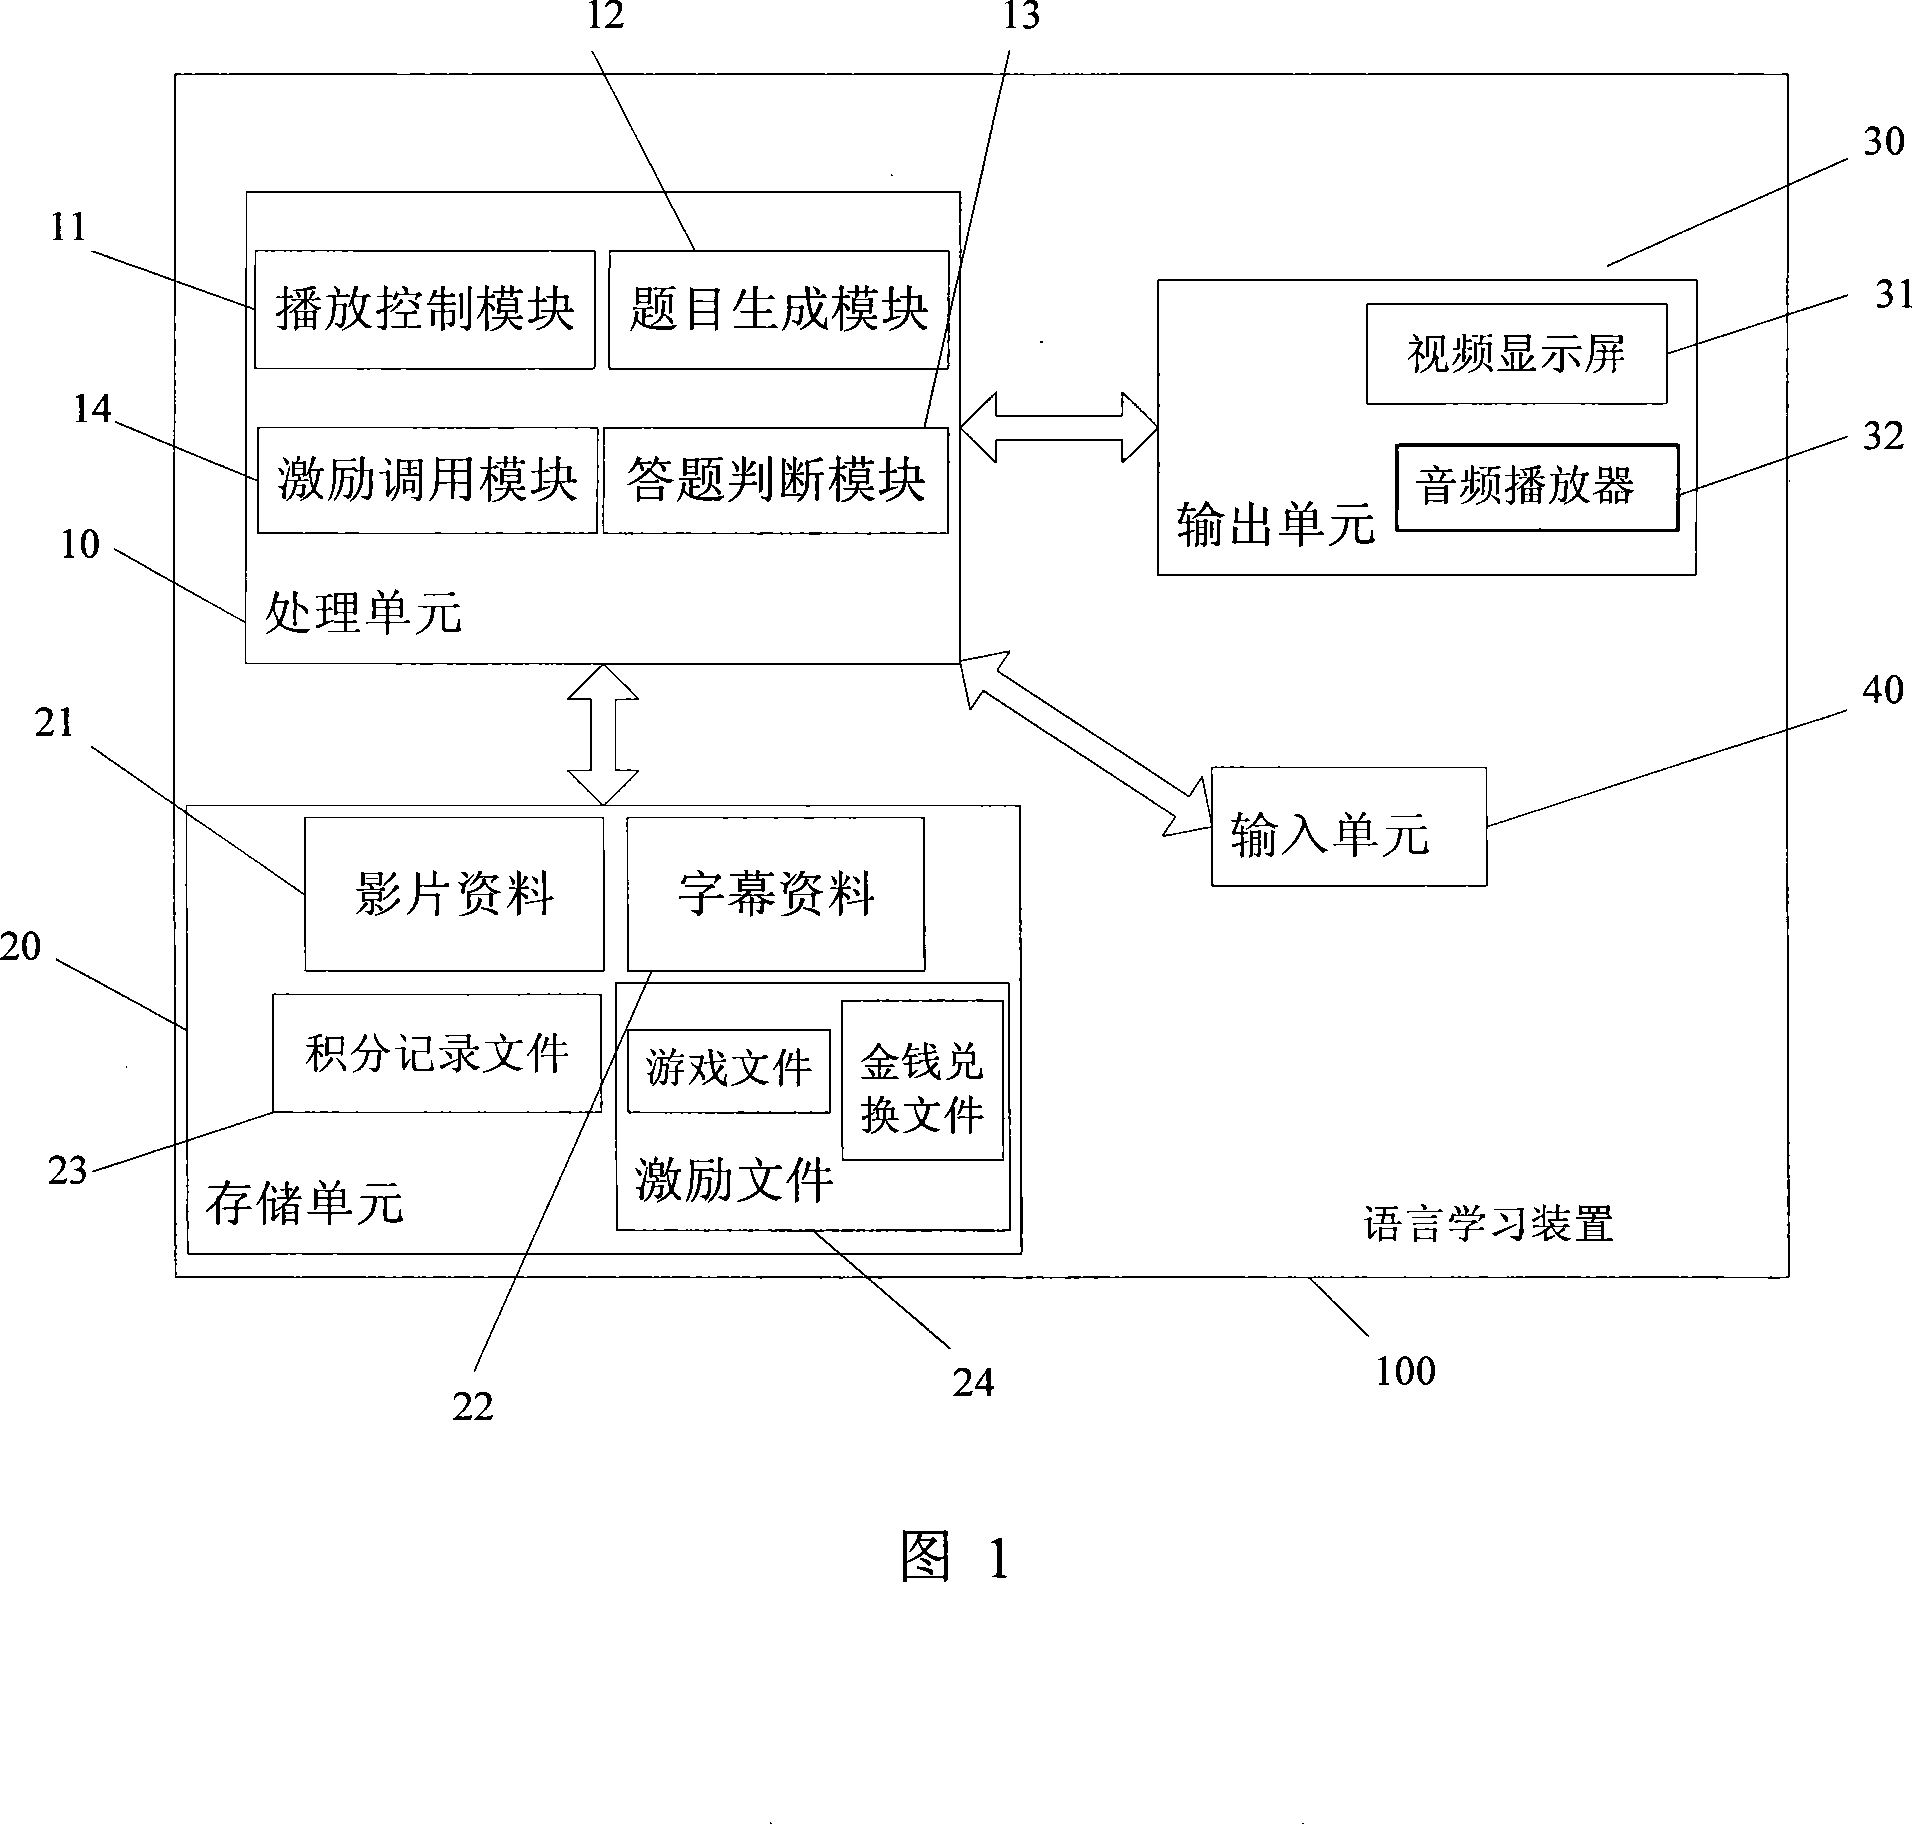 Language learning device with excitation, and language learning method with excitation